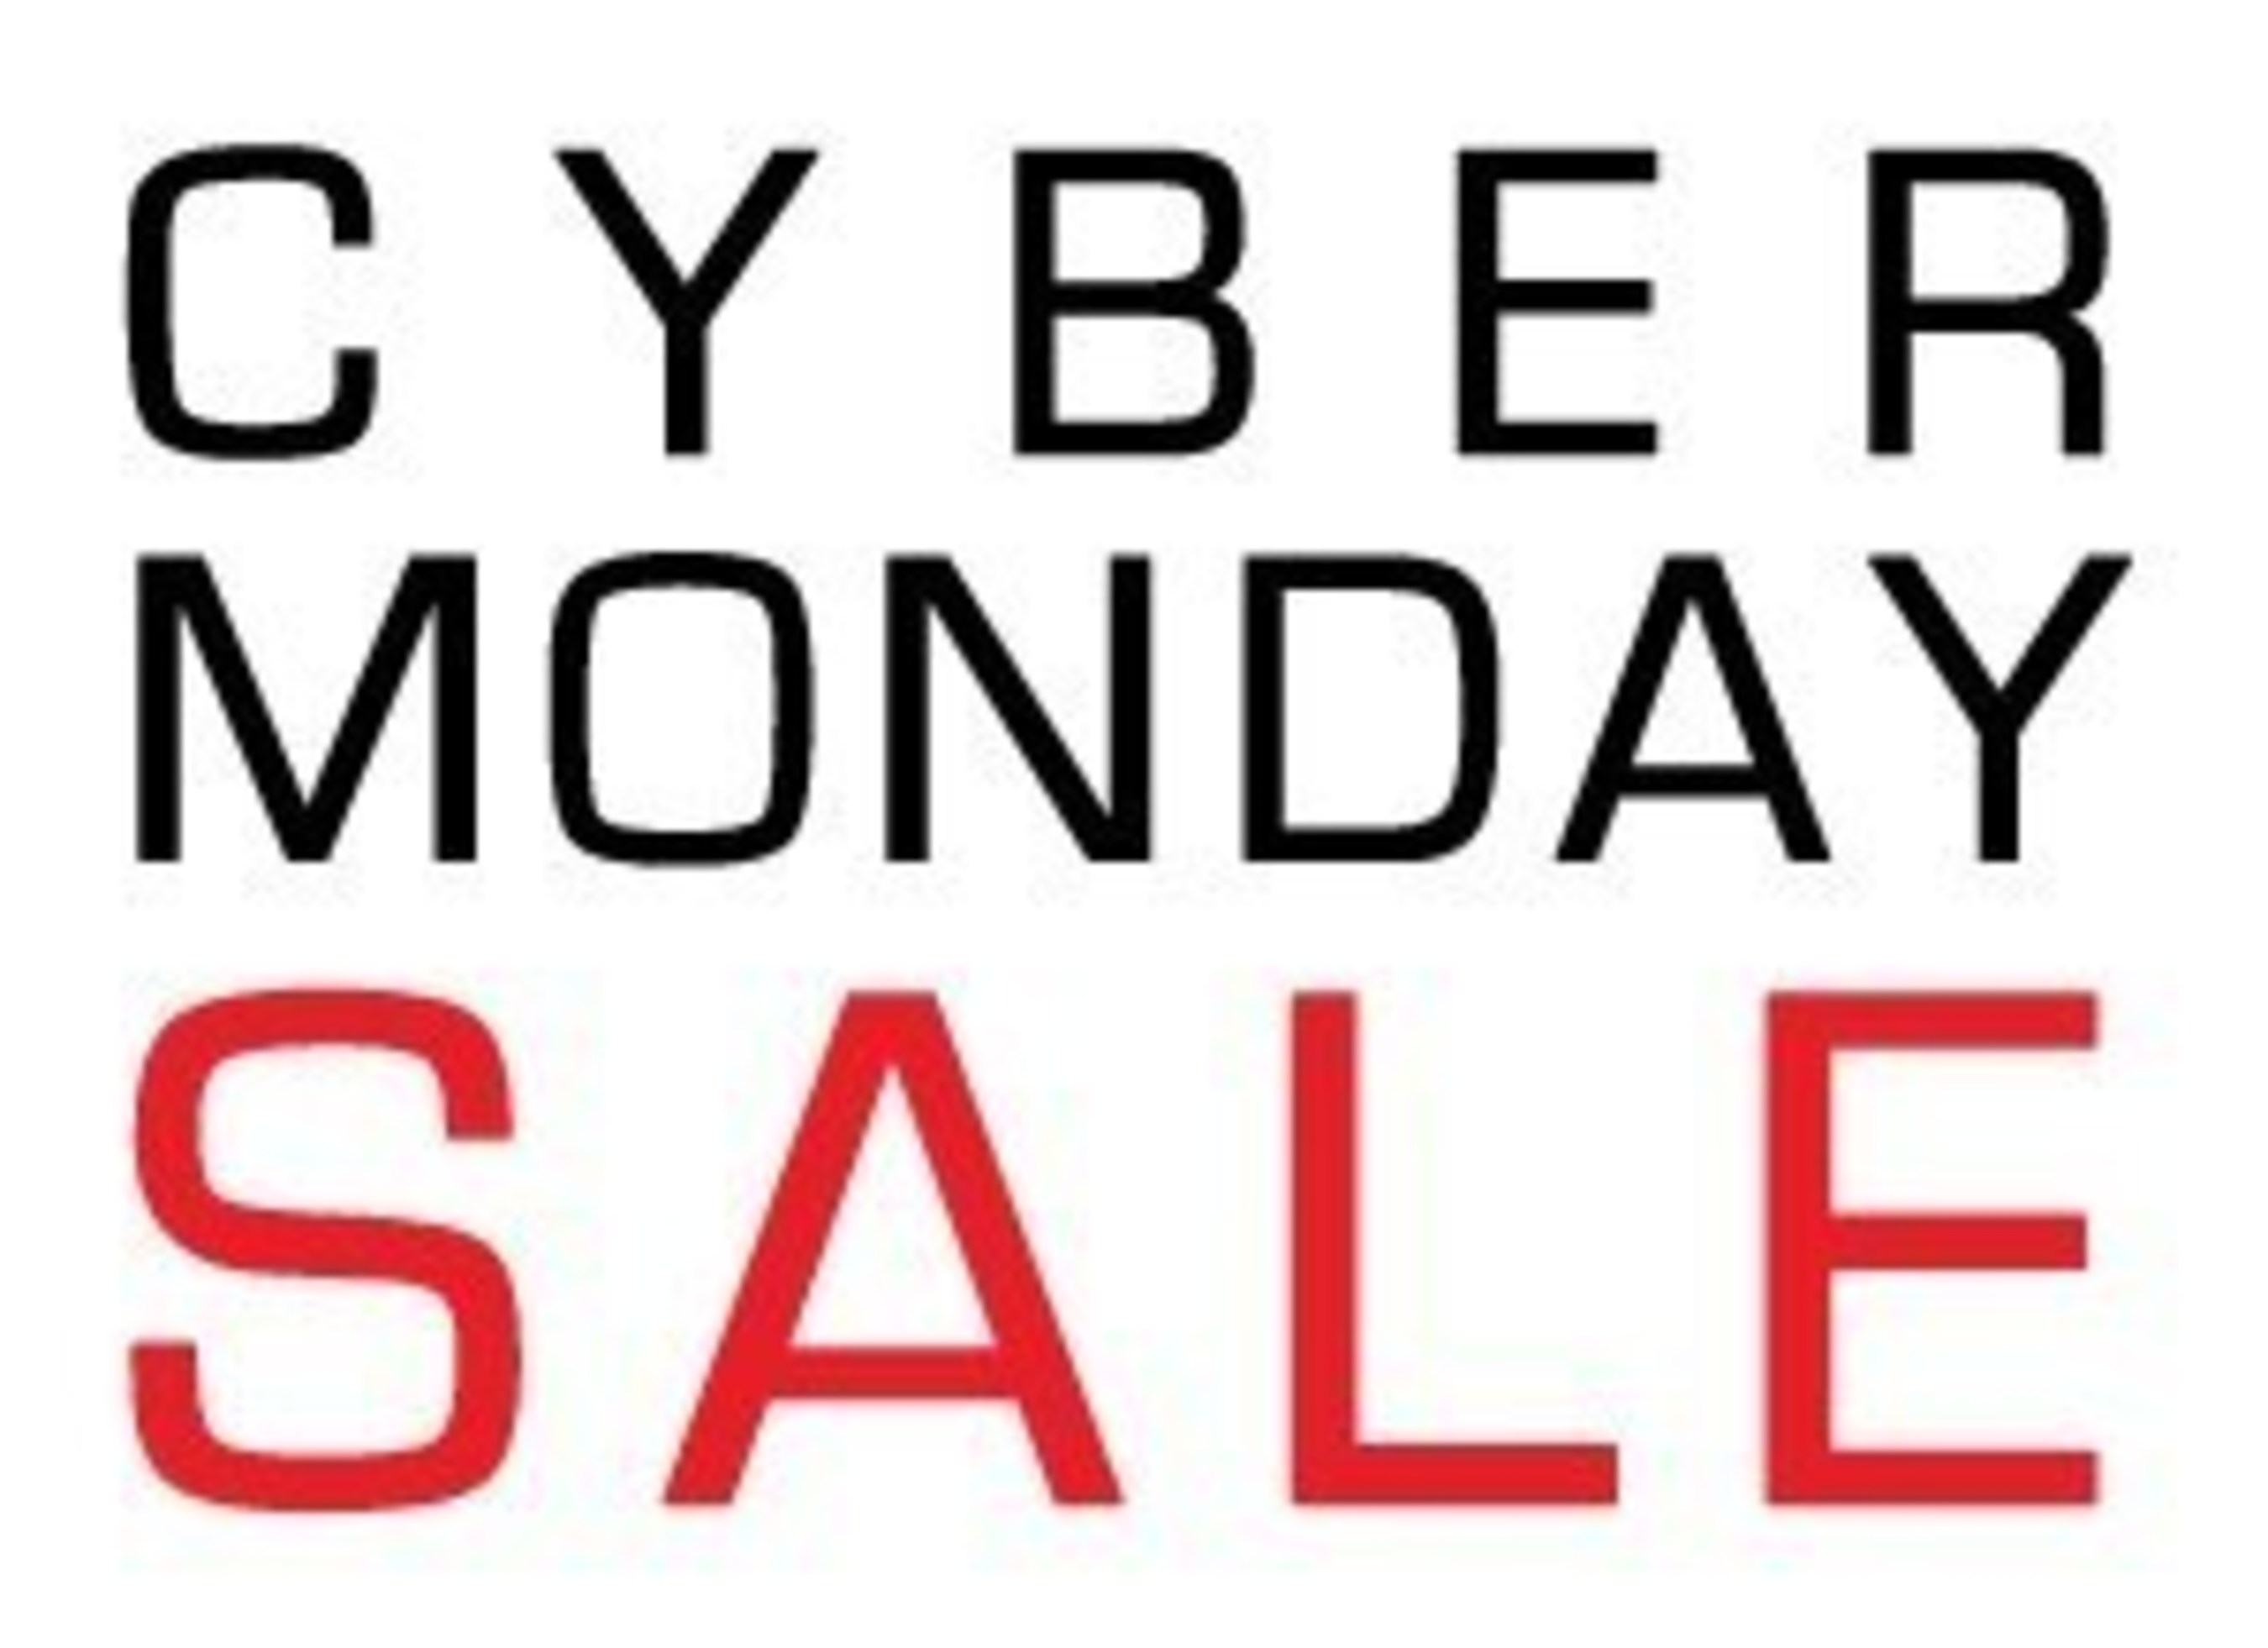 Cyber Monday Deals 2015 at 0 Top 5 List for the Best Deals on Laptops, TVs, Cameras,